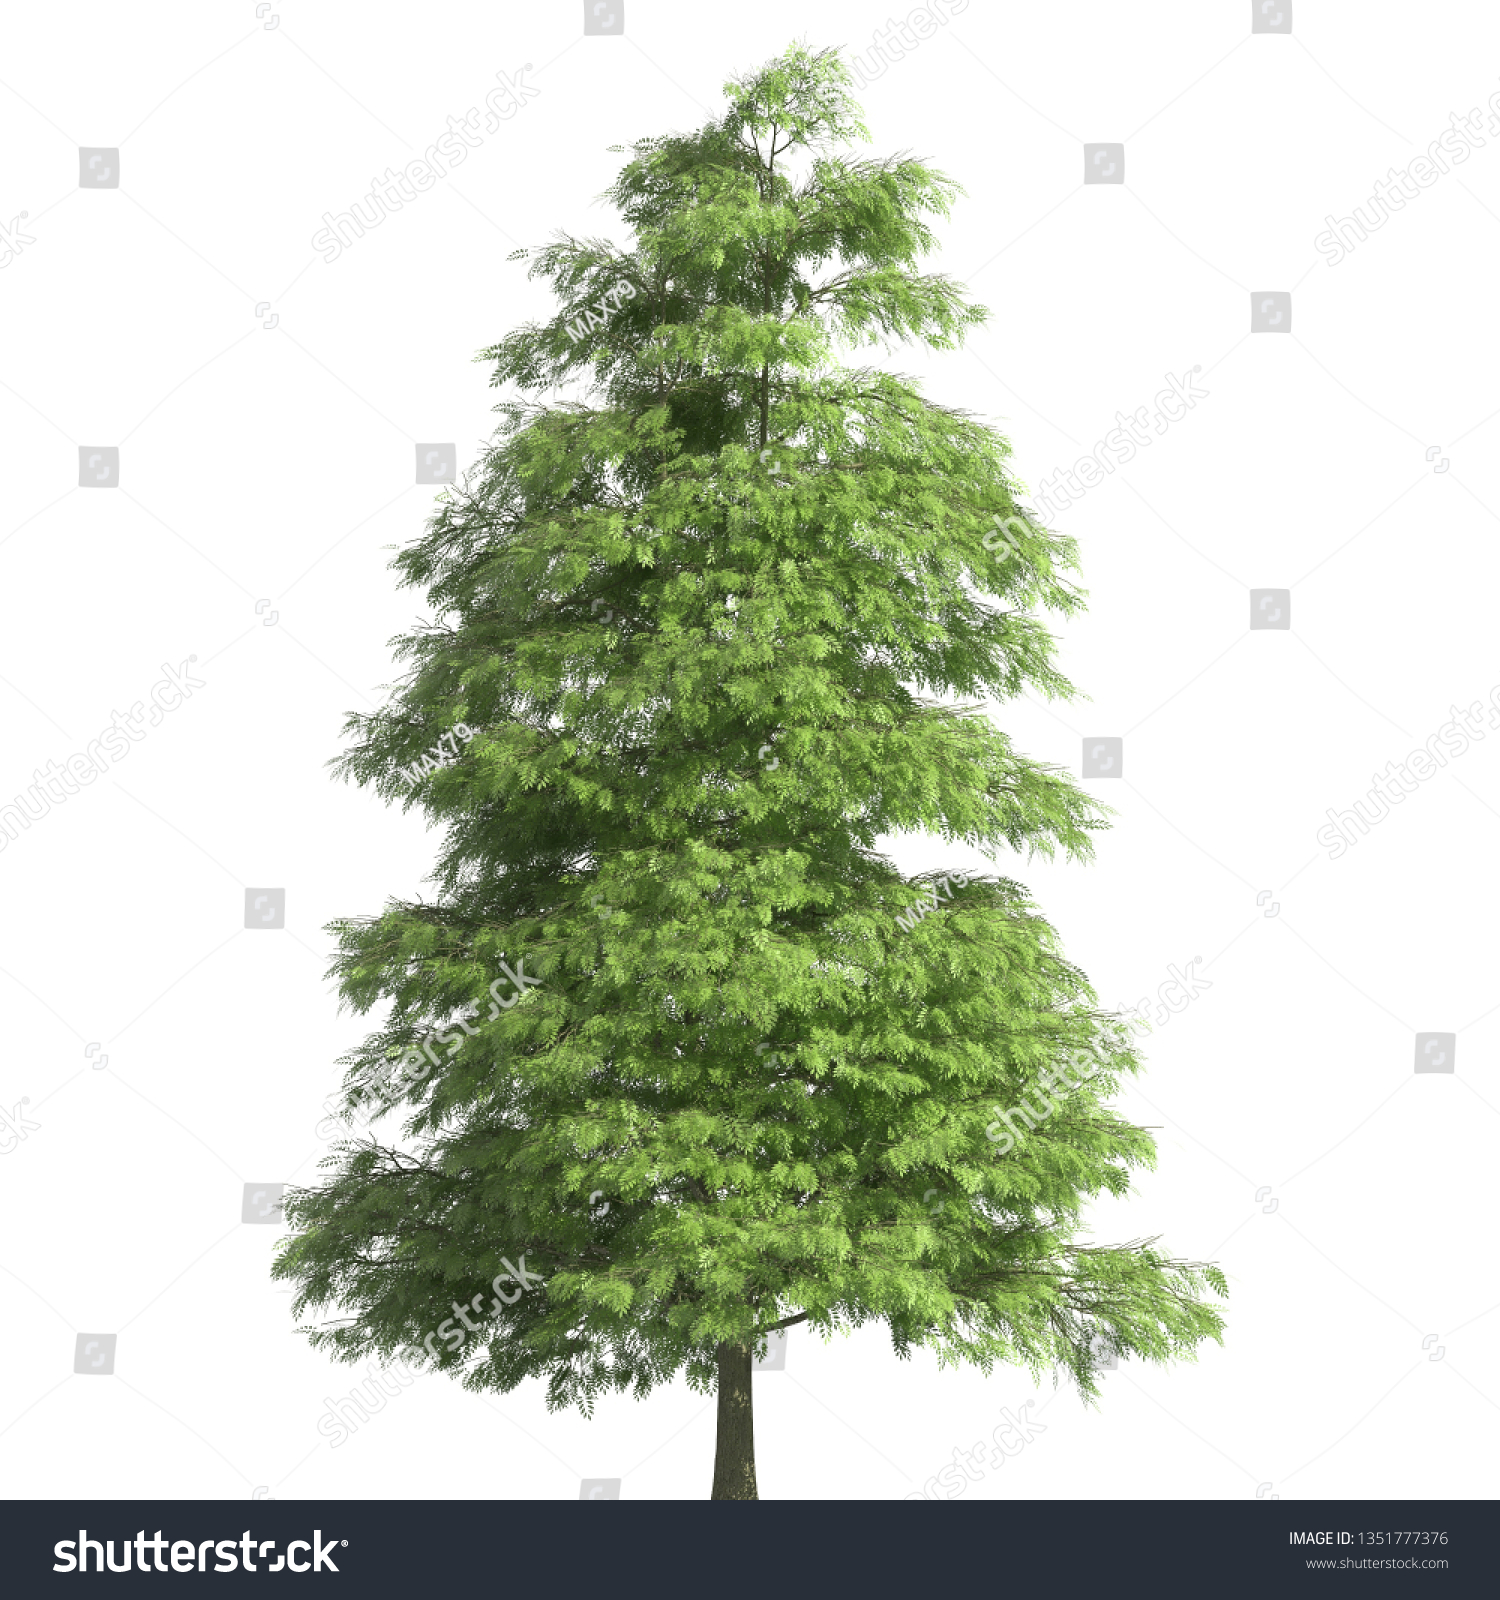 Tree 3d illustration isolated on the white background #1351777376